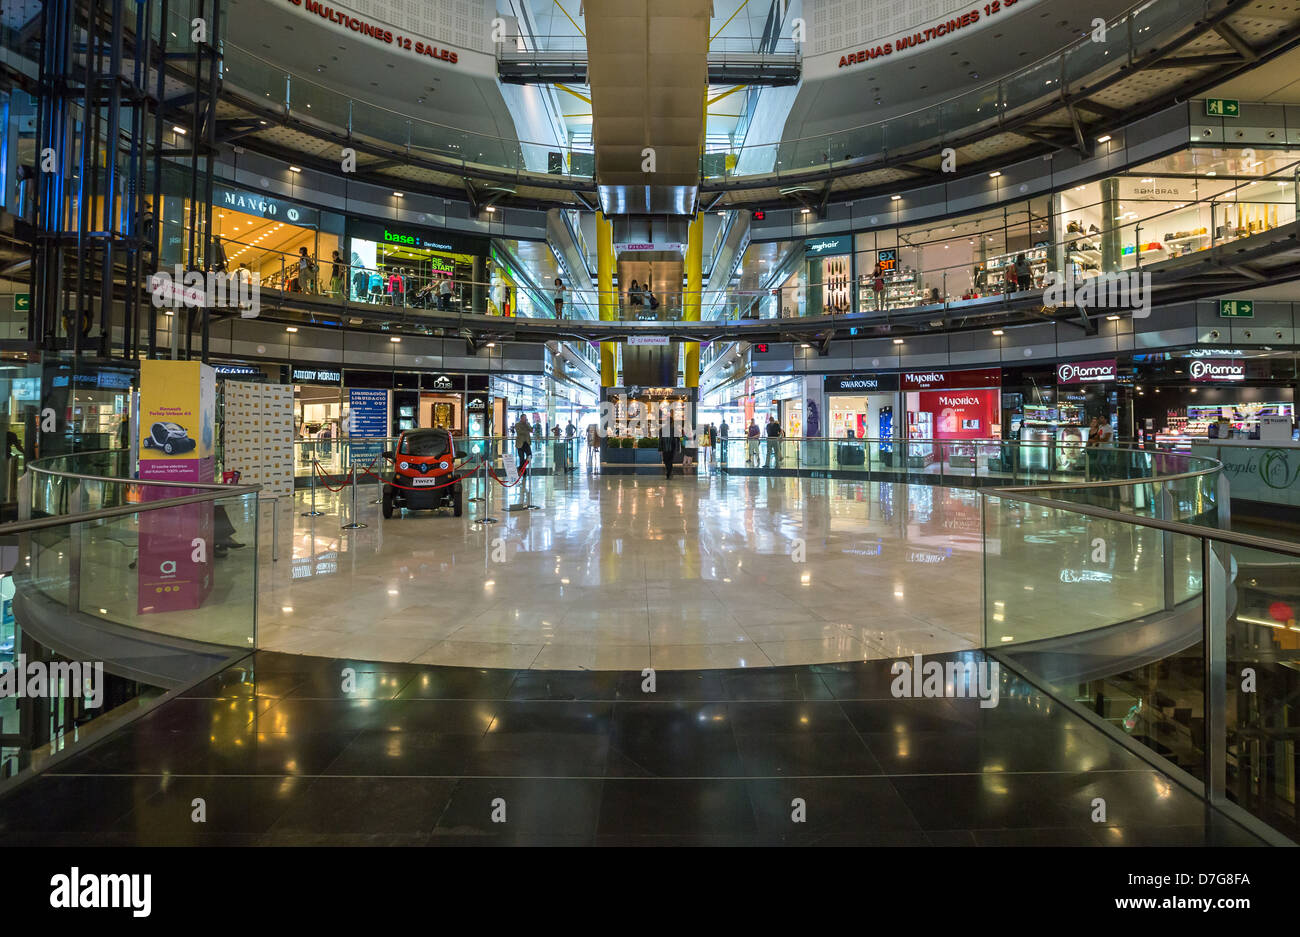 Inside Mall Spain High Resolution Stock Photography and Images - Alamy